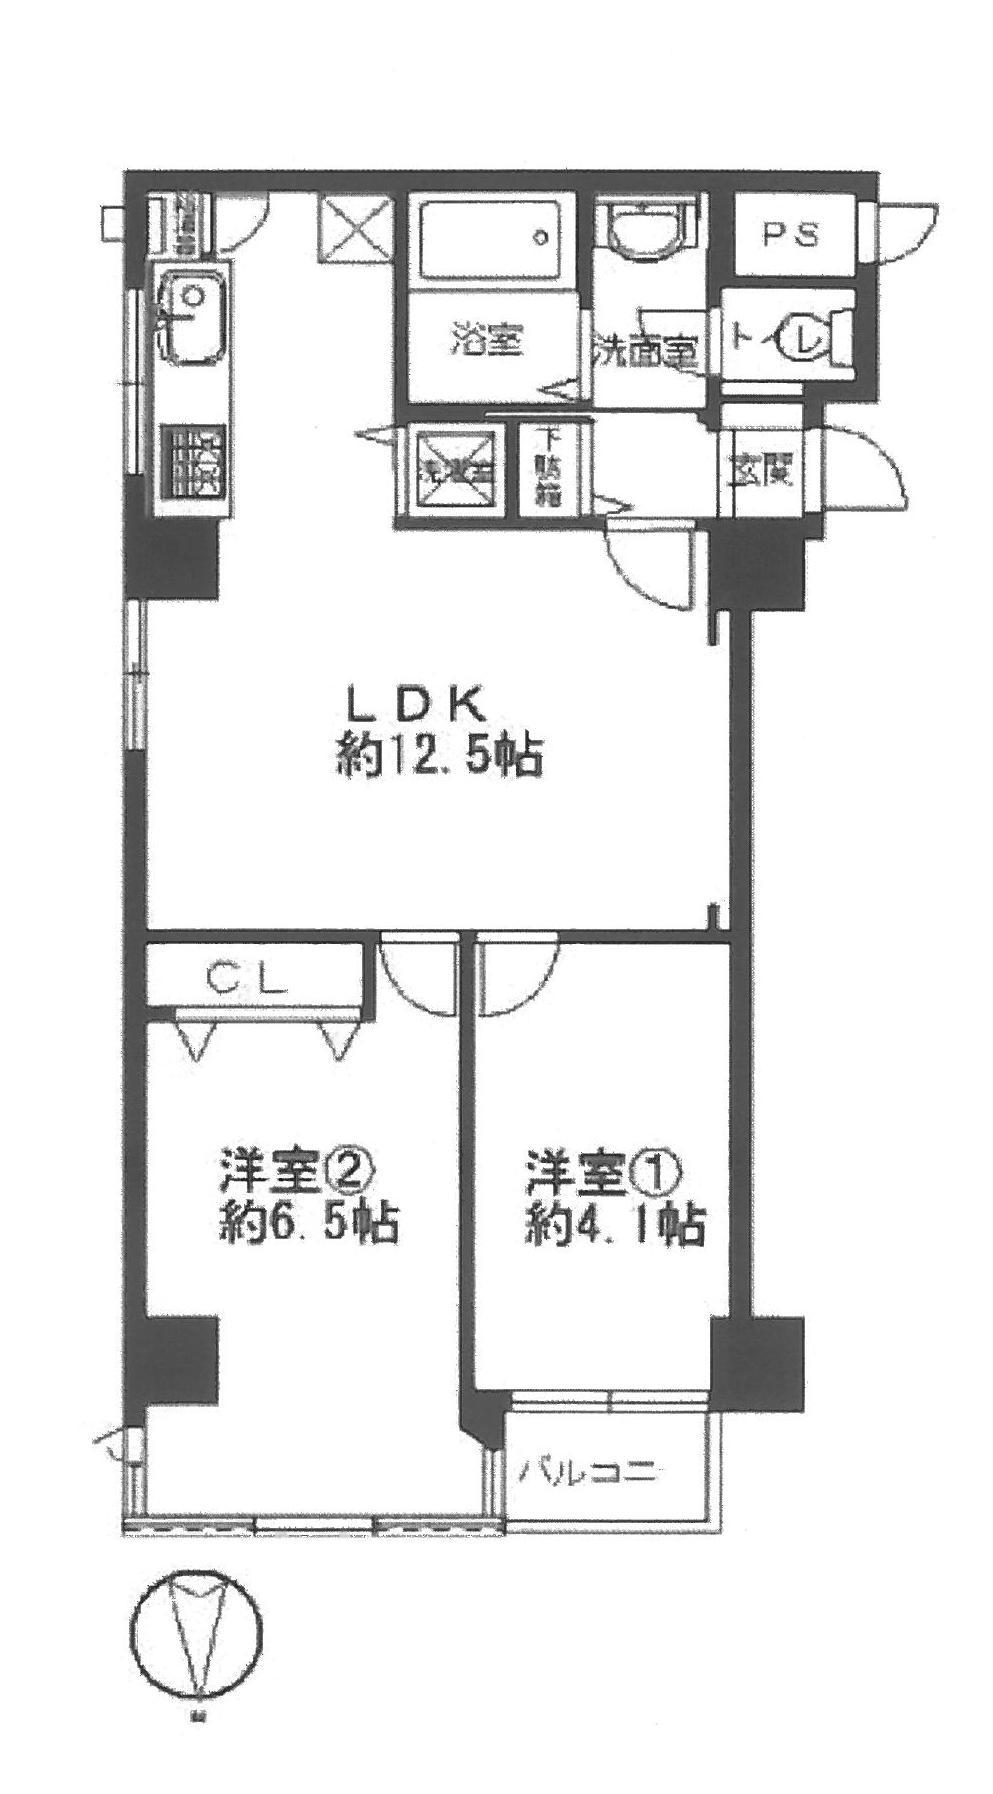 Floor plan. 3LDK, Price 13.8 million yen, Occupied area 56.89 sq m , Balcony area 5.28 sq m 2013 September renovation completed Office use Allowed per (Terms have) Yotsubashi 5-minute walk from the second floor northeast corner room to the station, There is a feeling of opening, Ventilation is good. Visitor is monitor phone, etc. glad facilities enhancement at a glance.